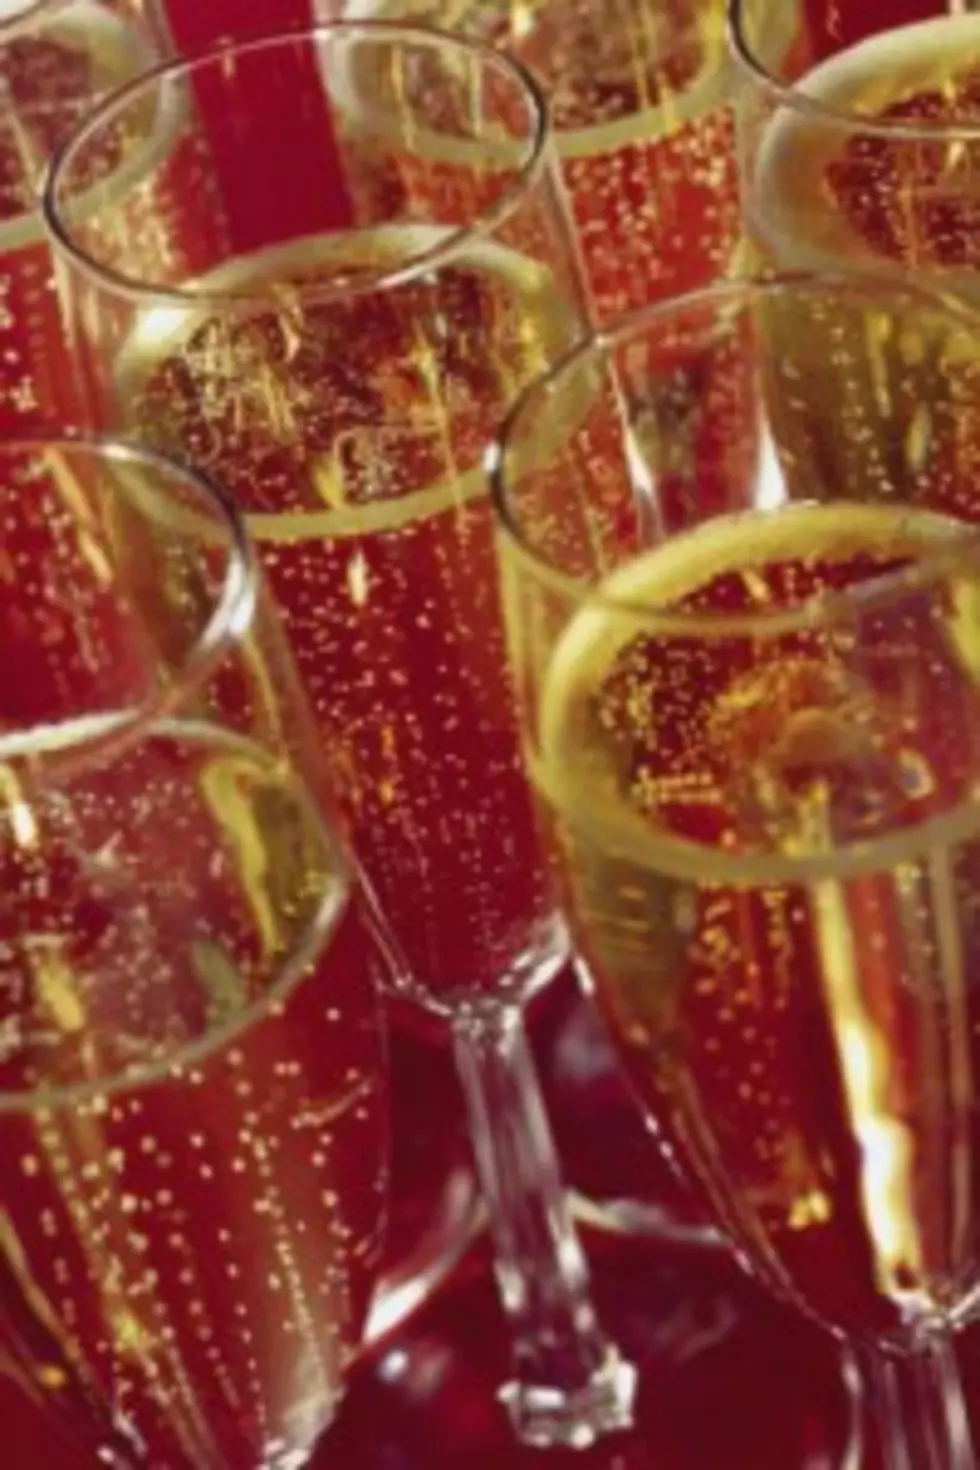 Some Bubbly Recipes to follow that Mid-night Kiss